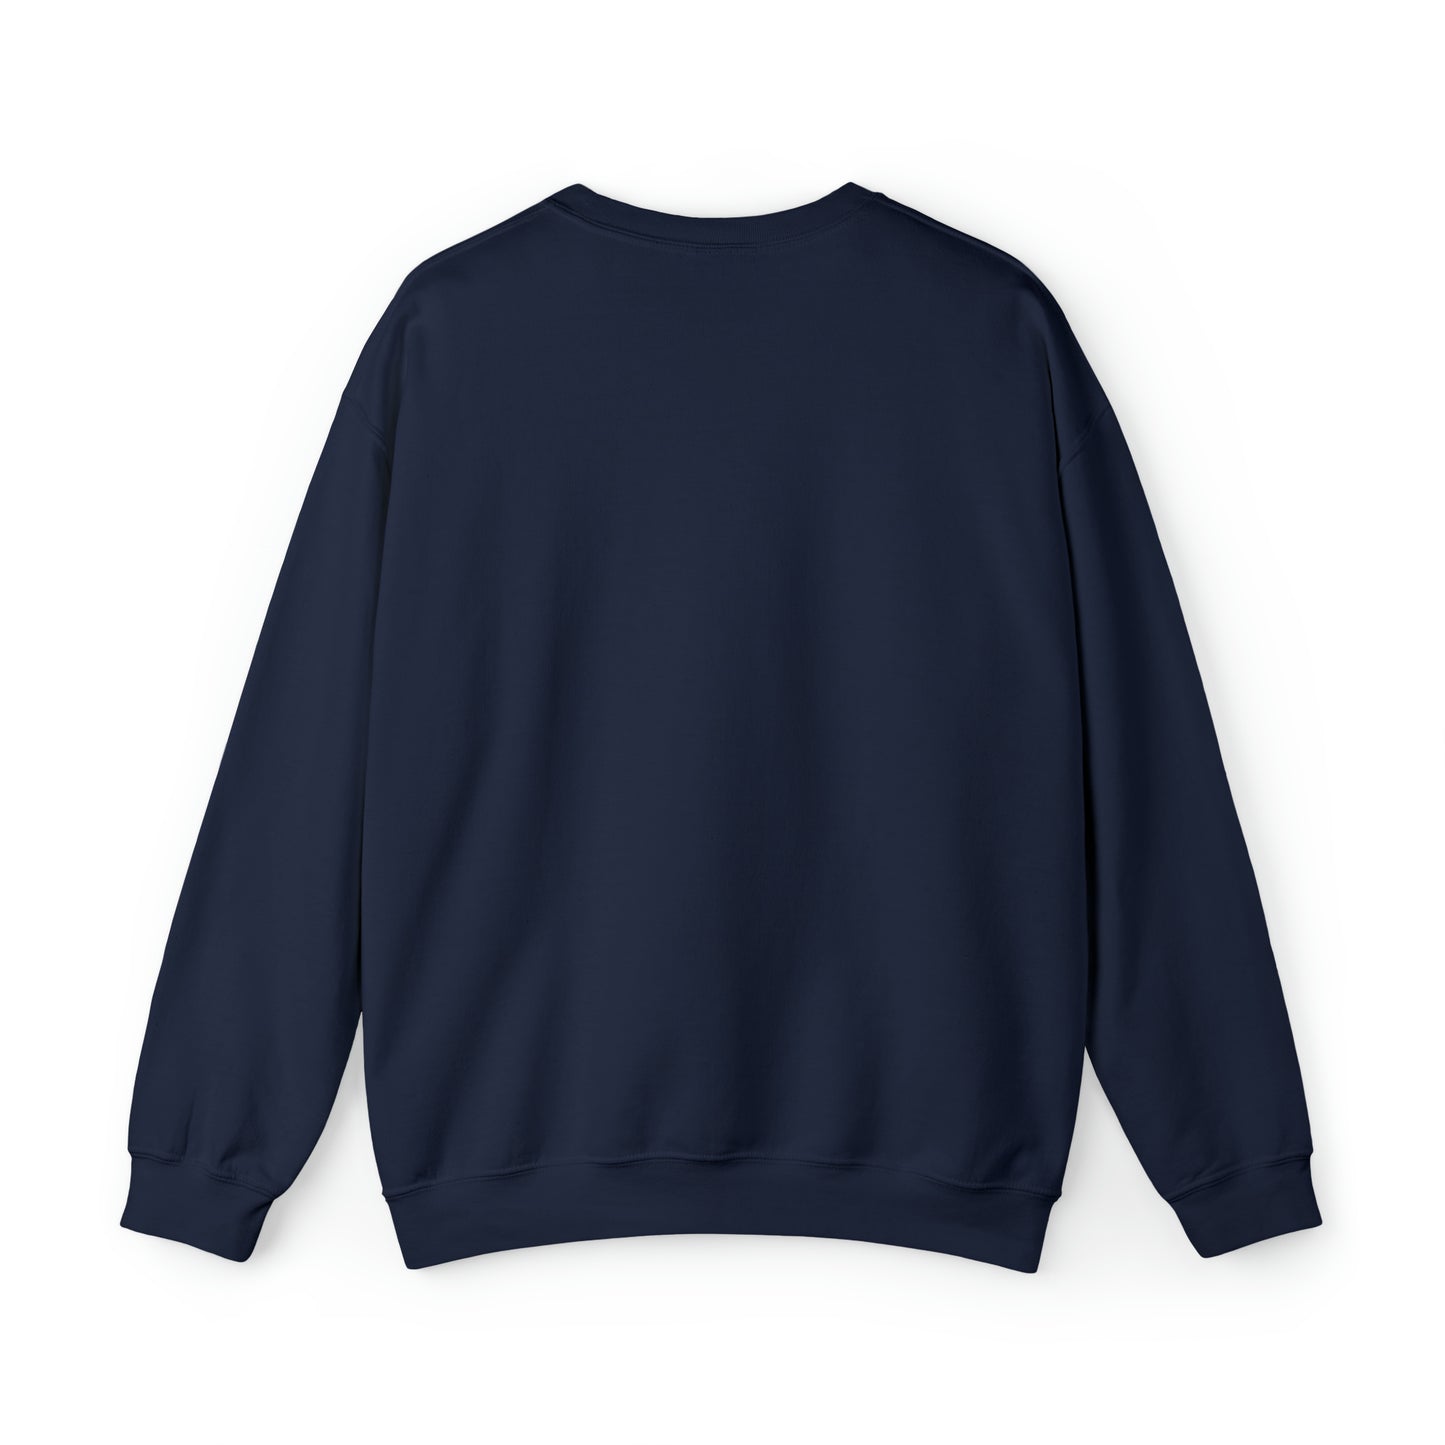 Laughter & Lefse Everyday Sweatshirt: Cozy Comfort with a Dash of Nordic Charm!